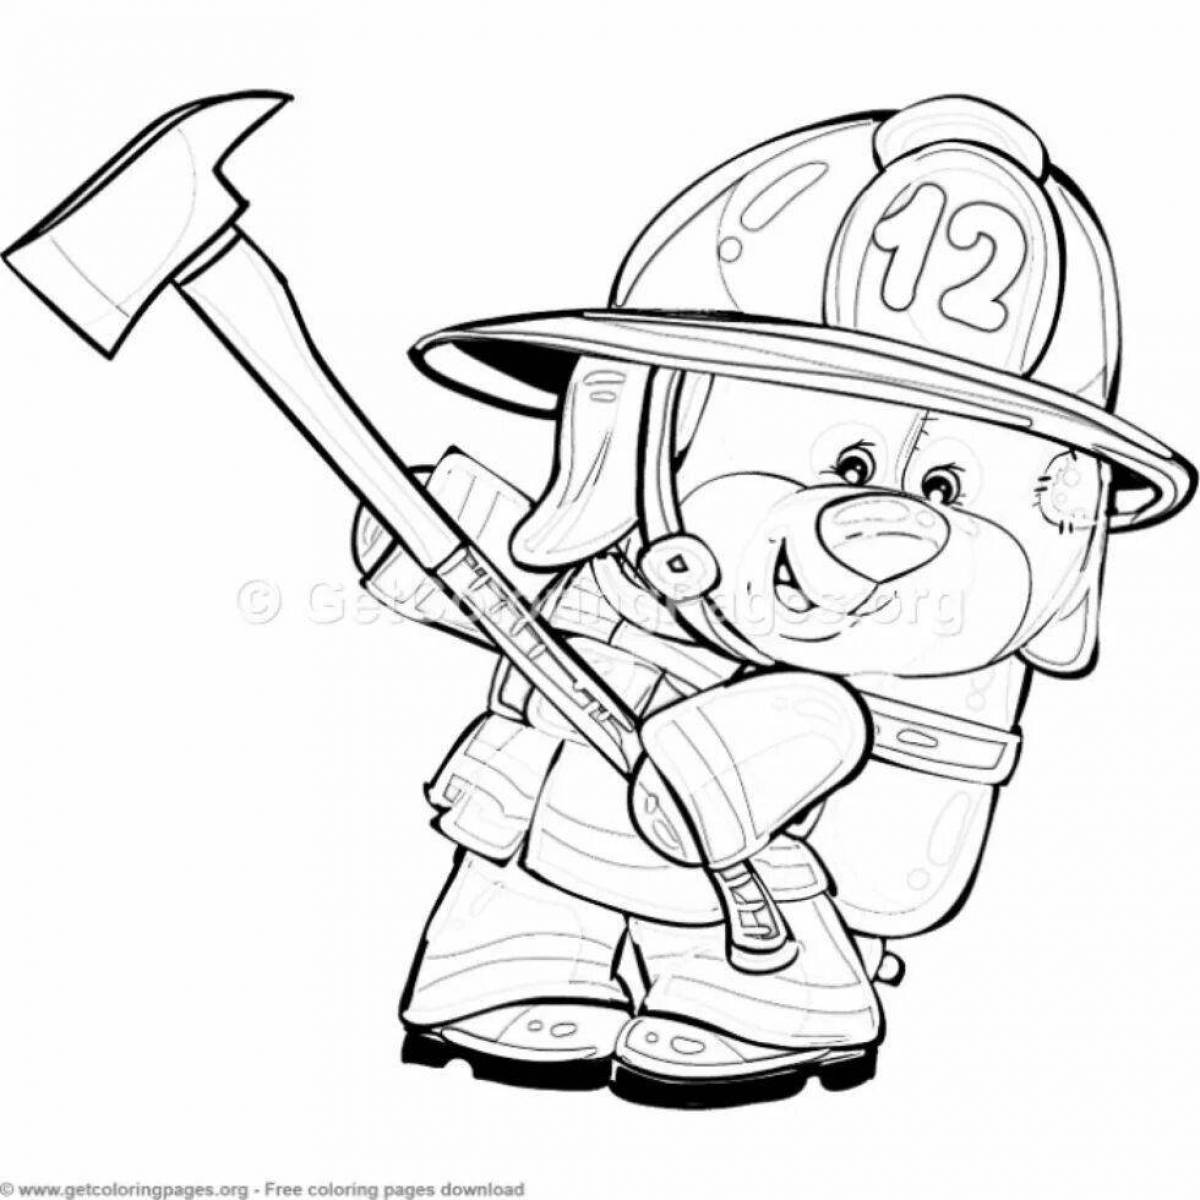 Glorious Fire Shield Coloring Page for Kids